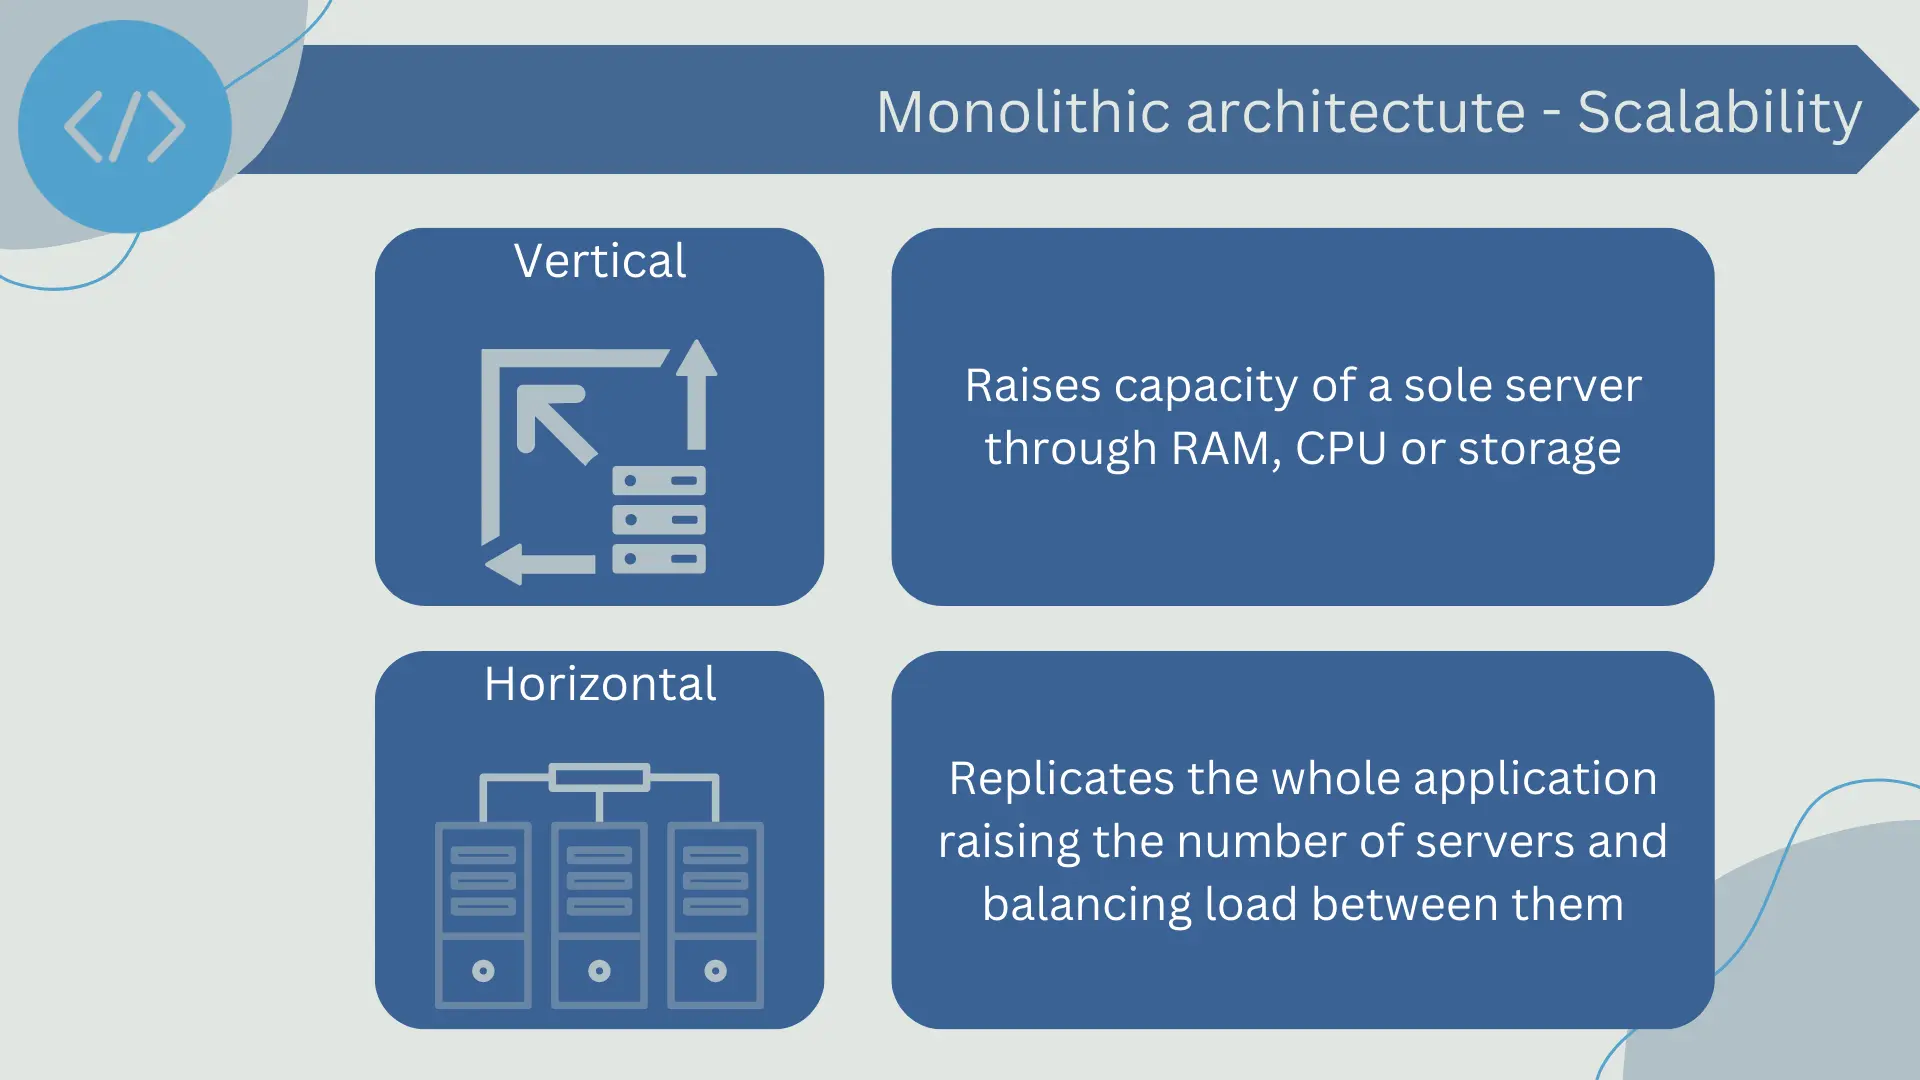 Scaling in monolithic architecture